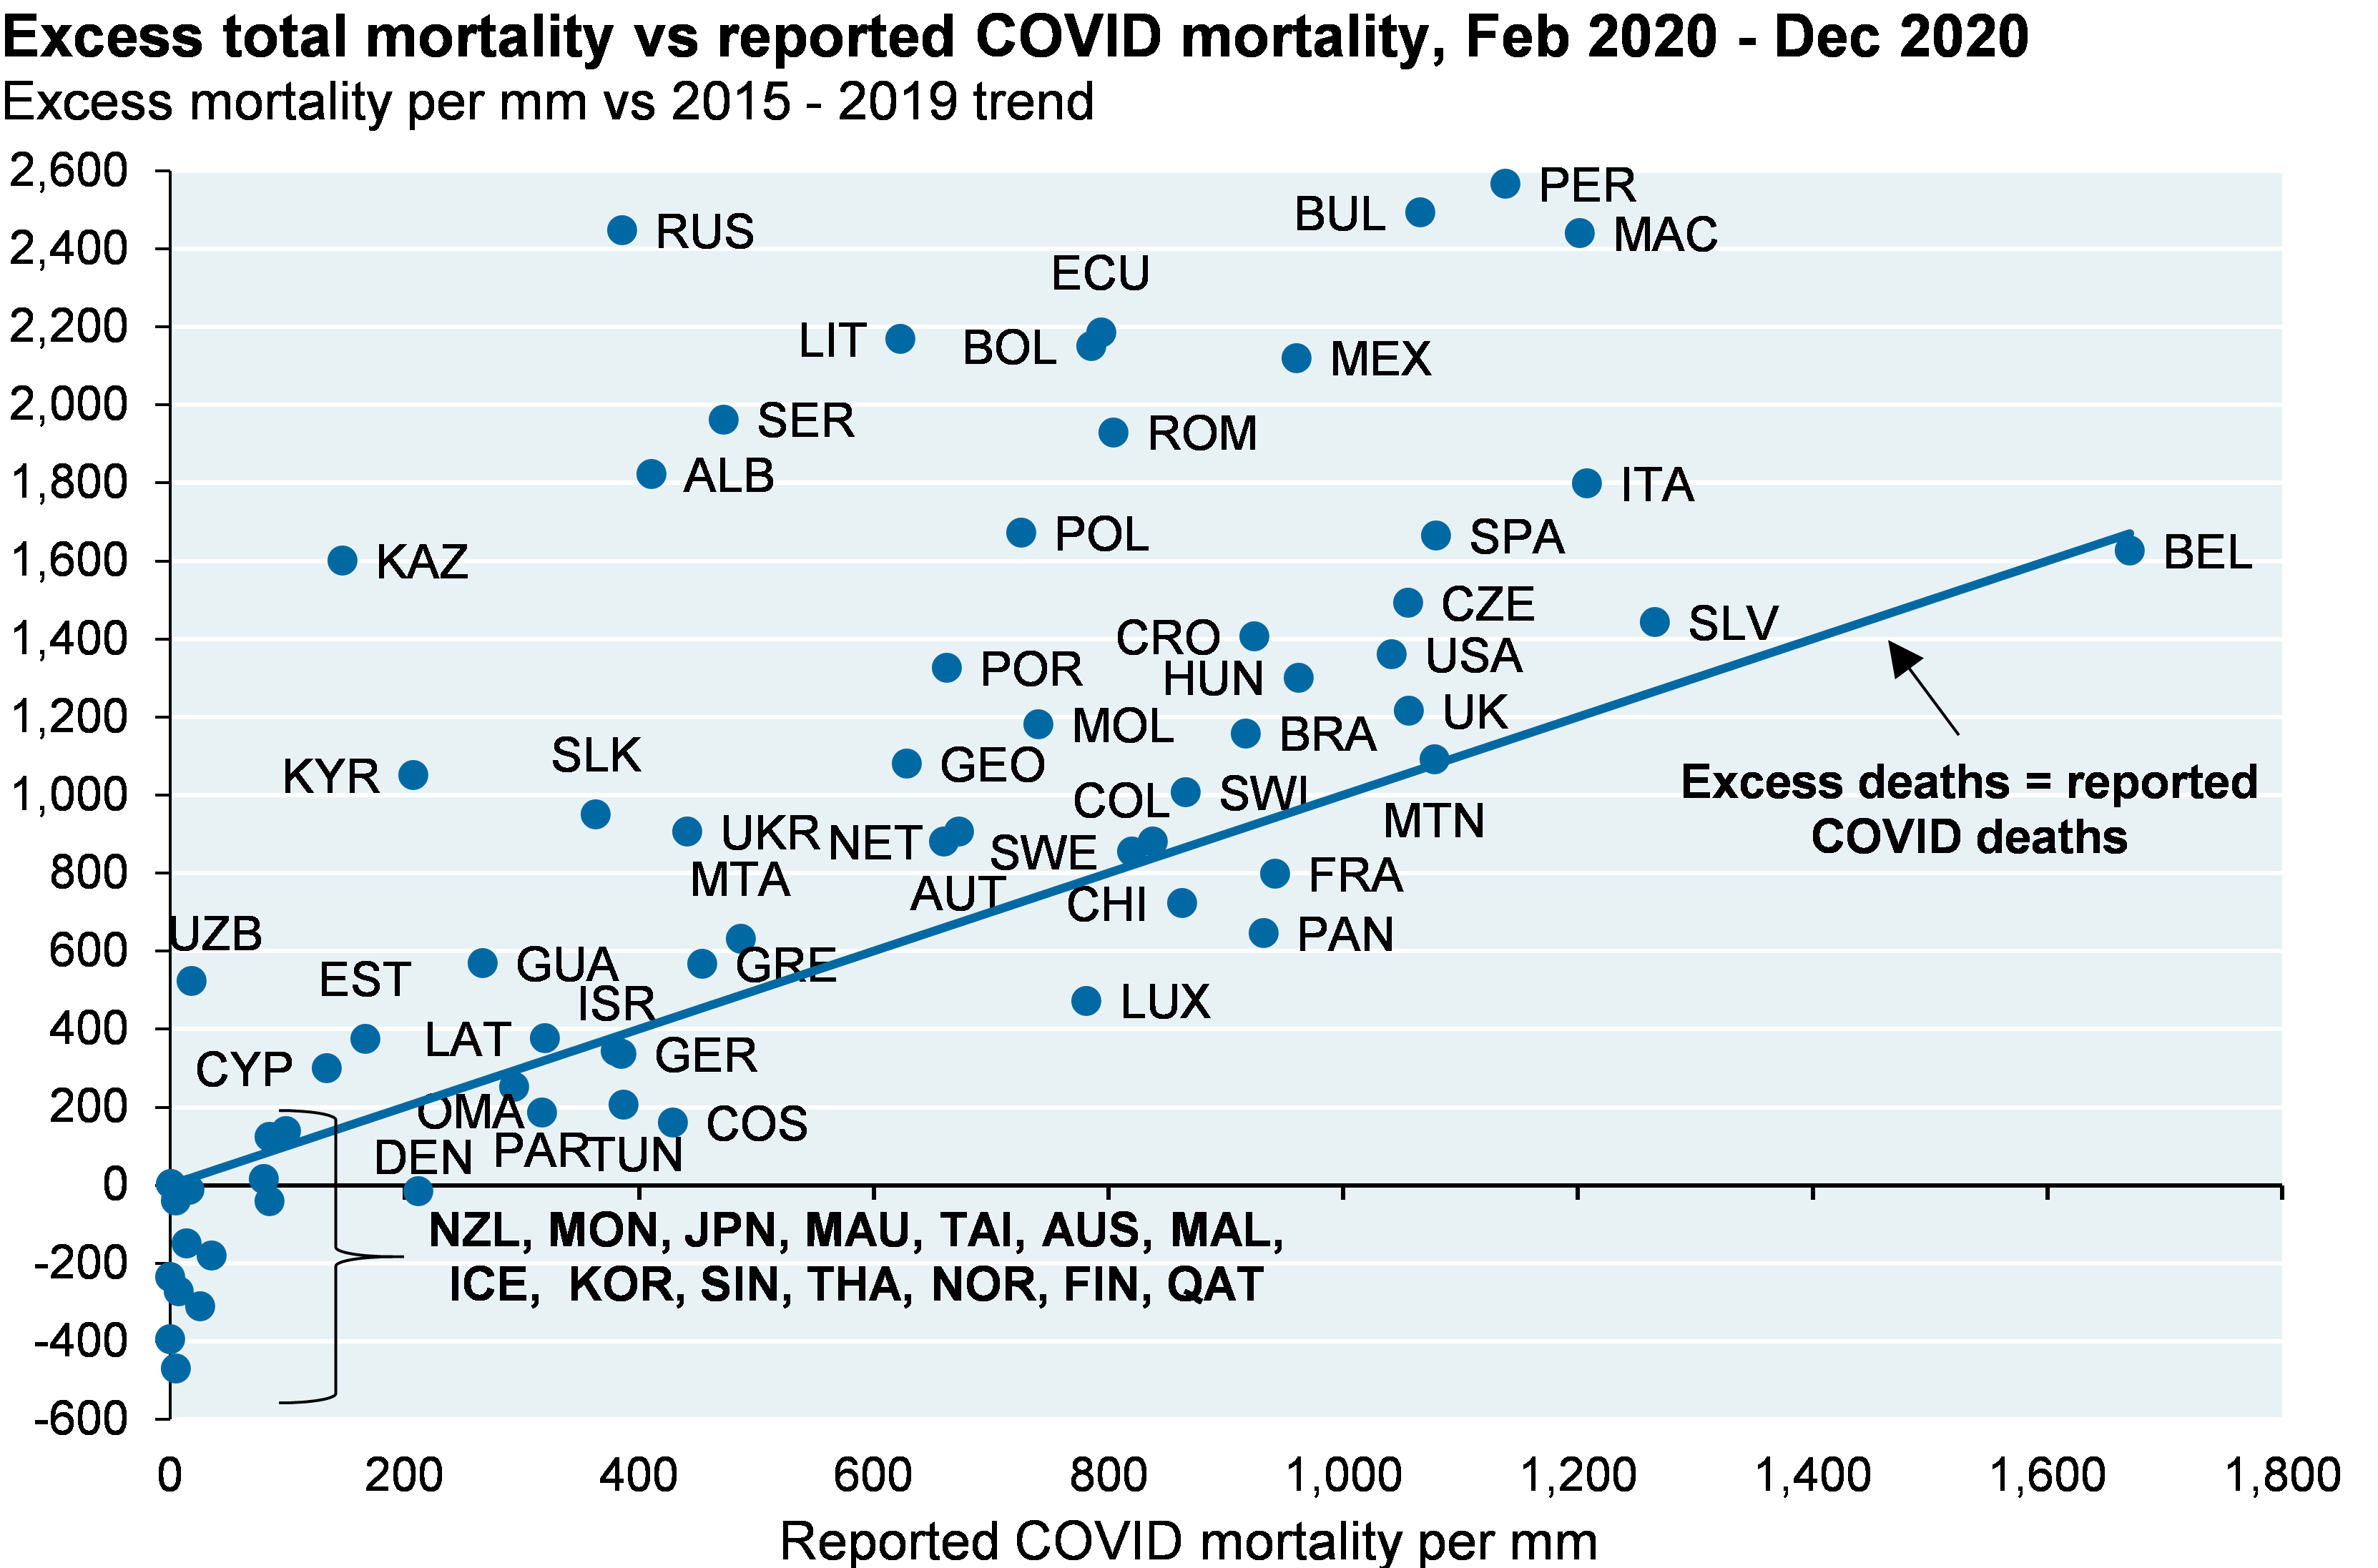 Dot plot chart shows excess total mortality vs reported COVID mortality, from February 2020 through December 2020. The y-axis shows excess mortality per mm vs 2015-2019 trend. The x-axis shows reported COVID mortality per mm. The chart shows an upwardly-sloping trend line which indicates the level at which excess deaths are equal to reported deaths. The farther above the line a country is, the more its excess deaths in 2020 exceeded reported COVID deaths. Many countries above the line are EM countries. 